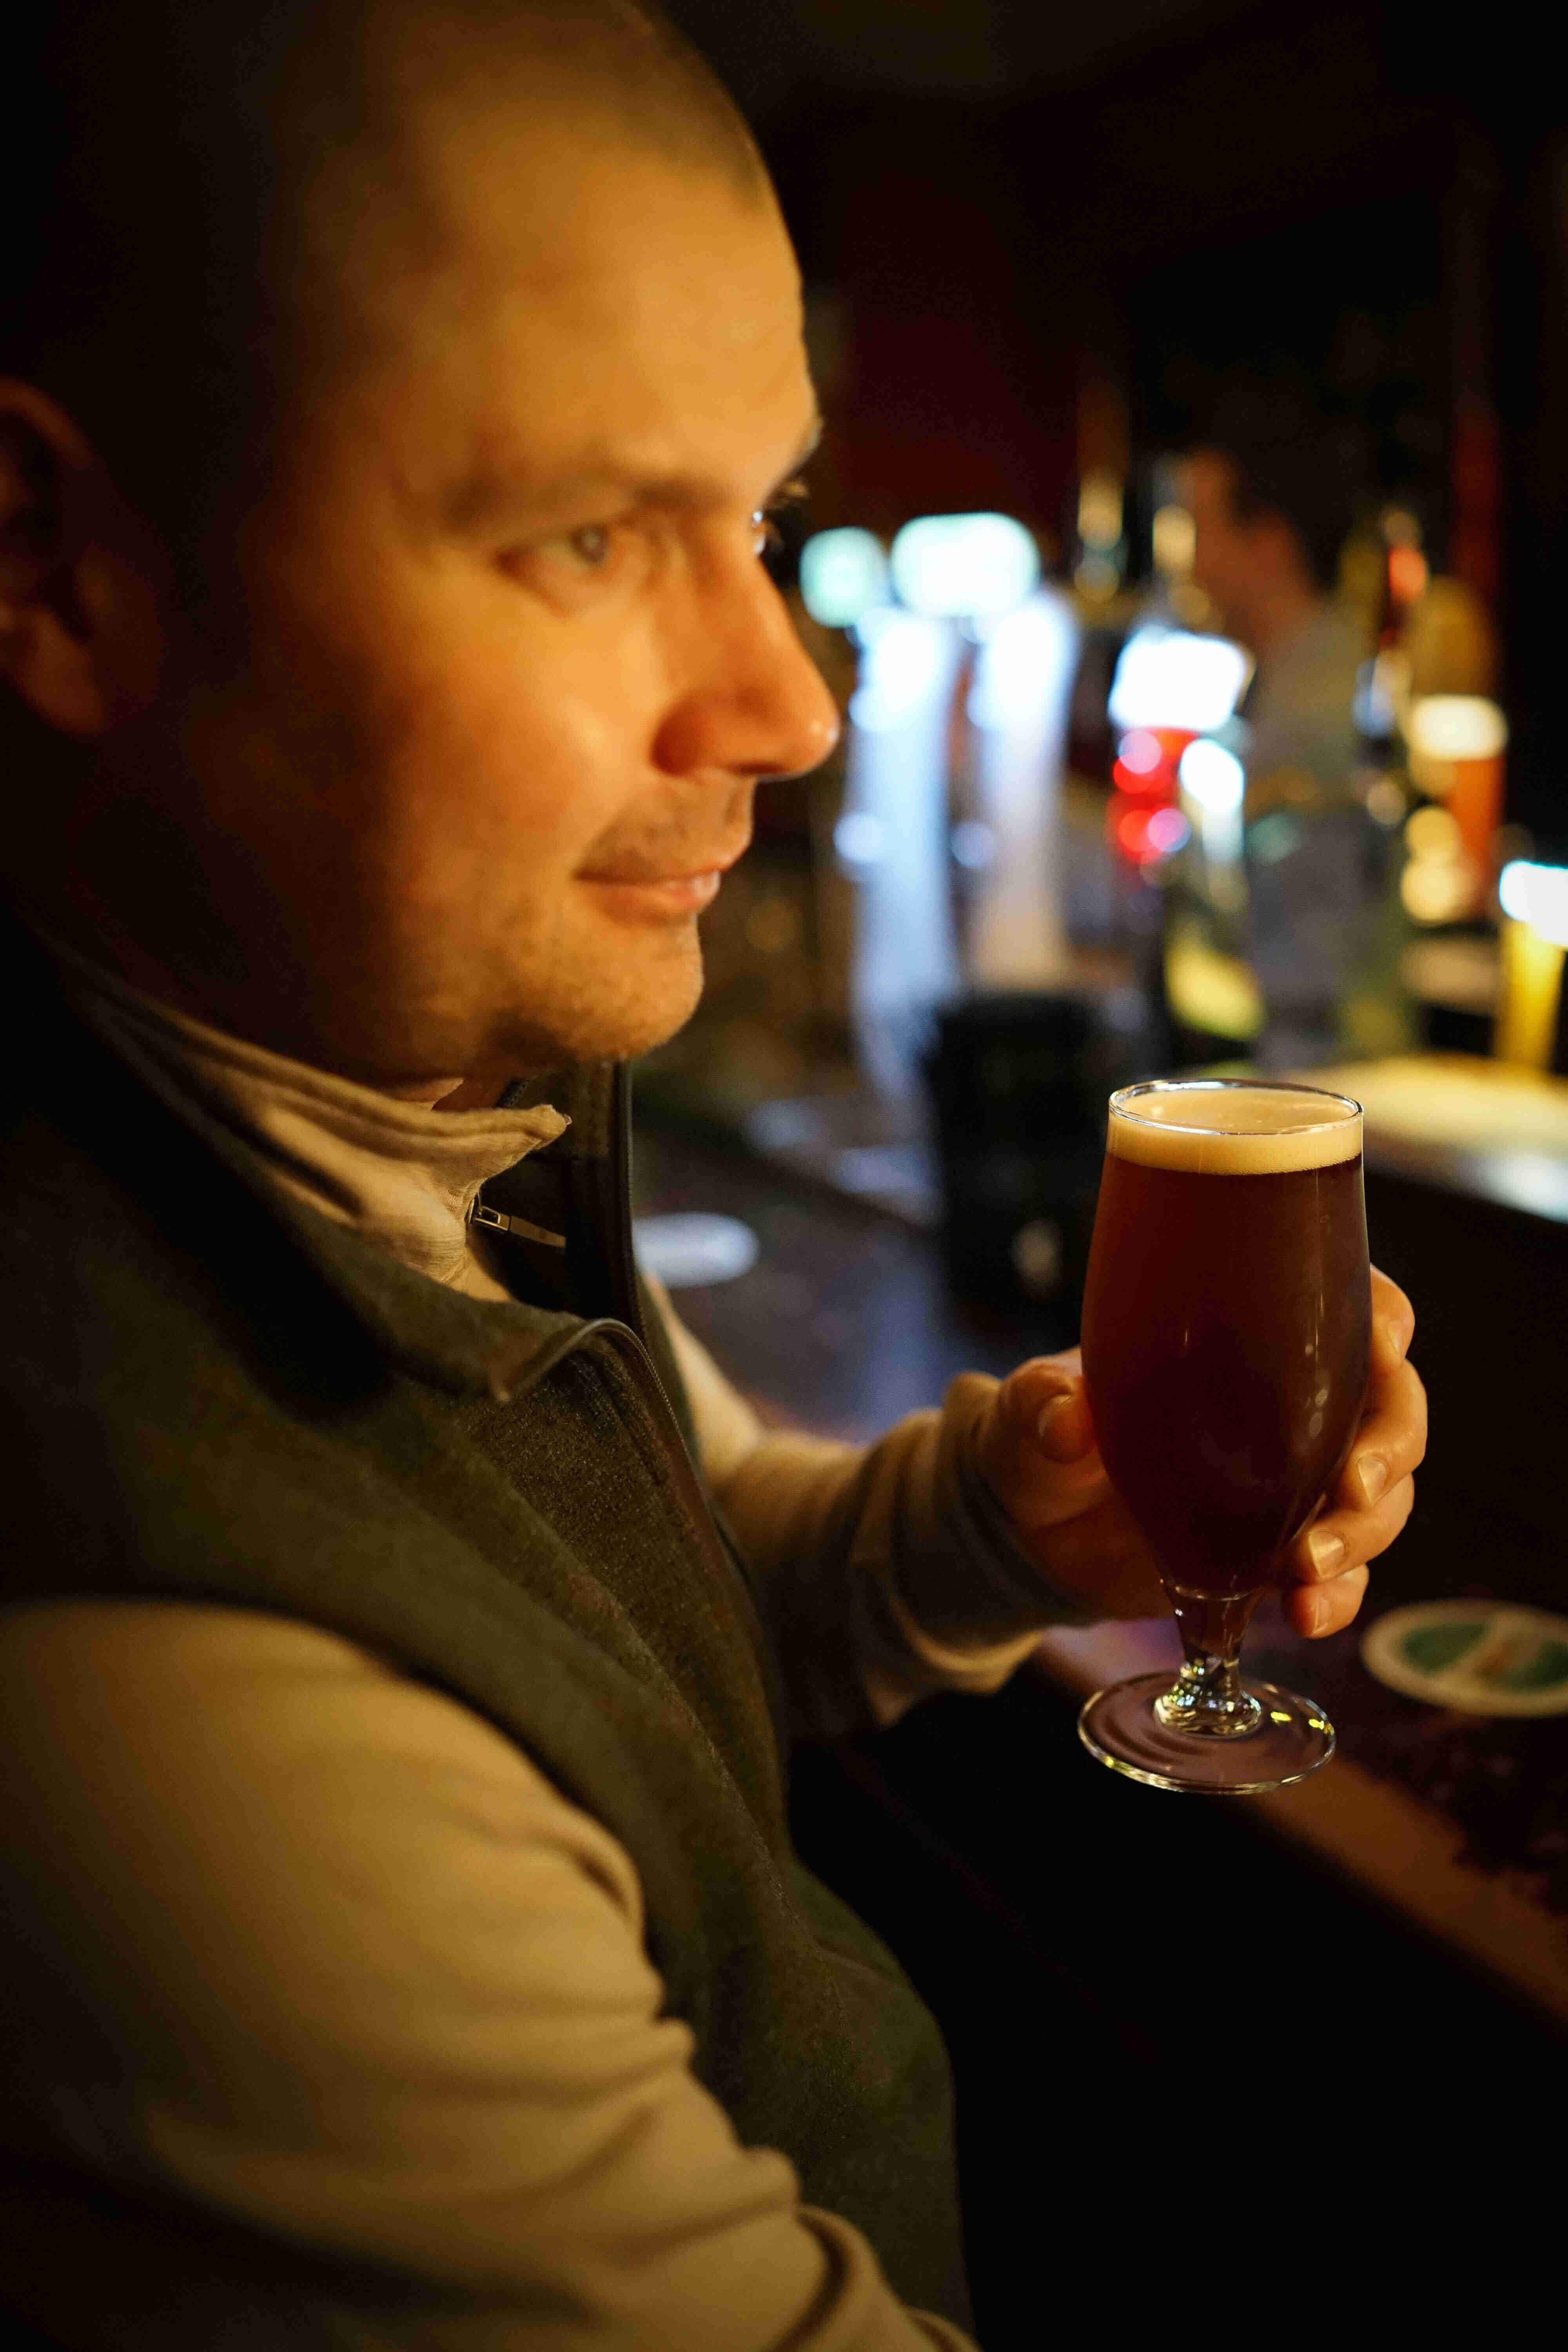 Headshot of the right side of person, holding a glass of beer, inside of a bar